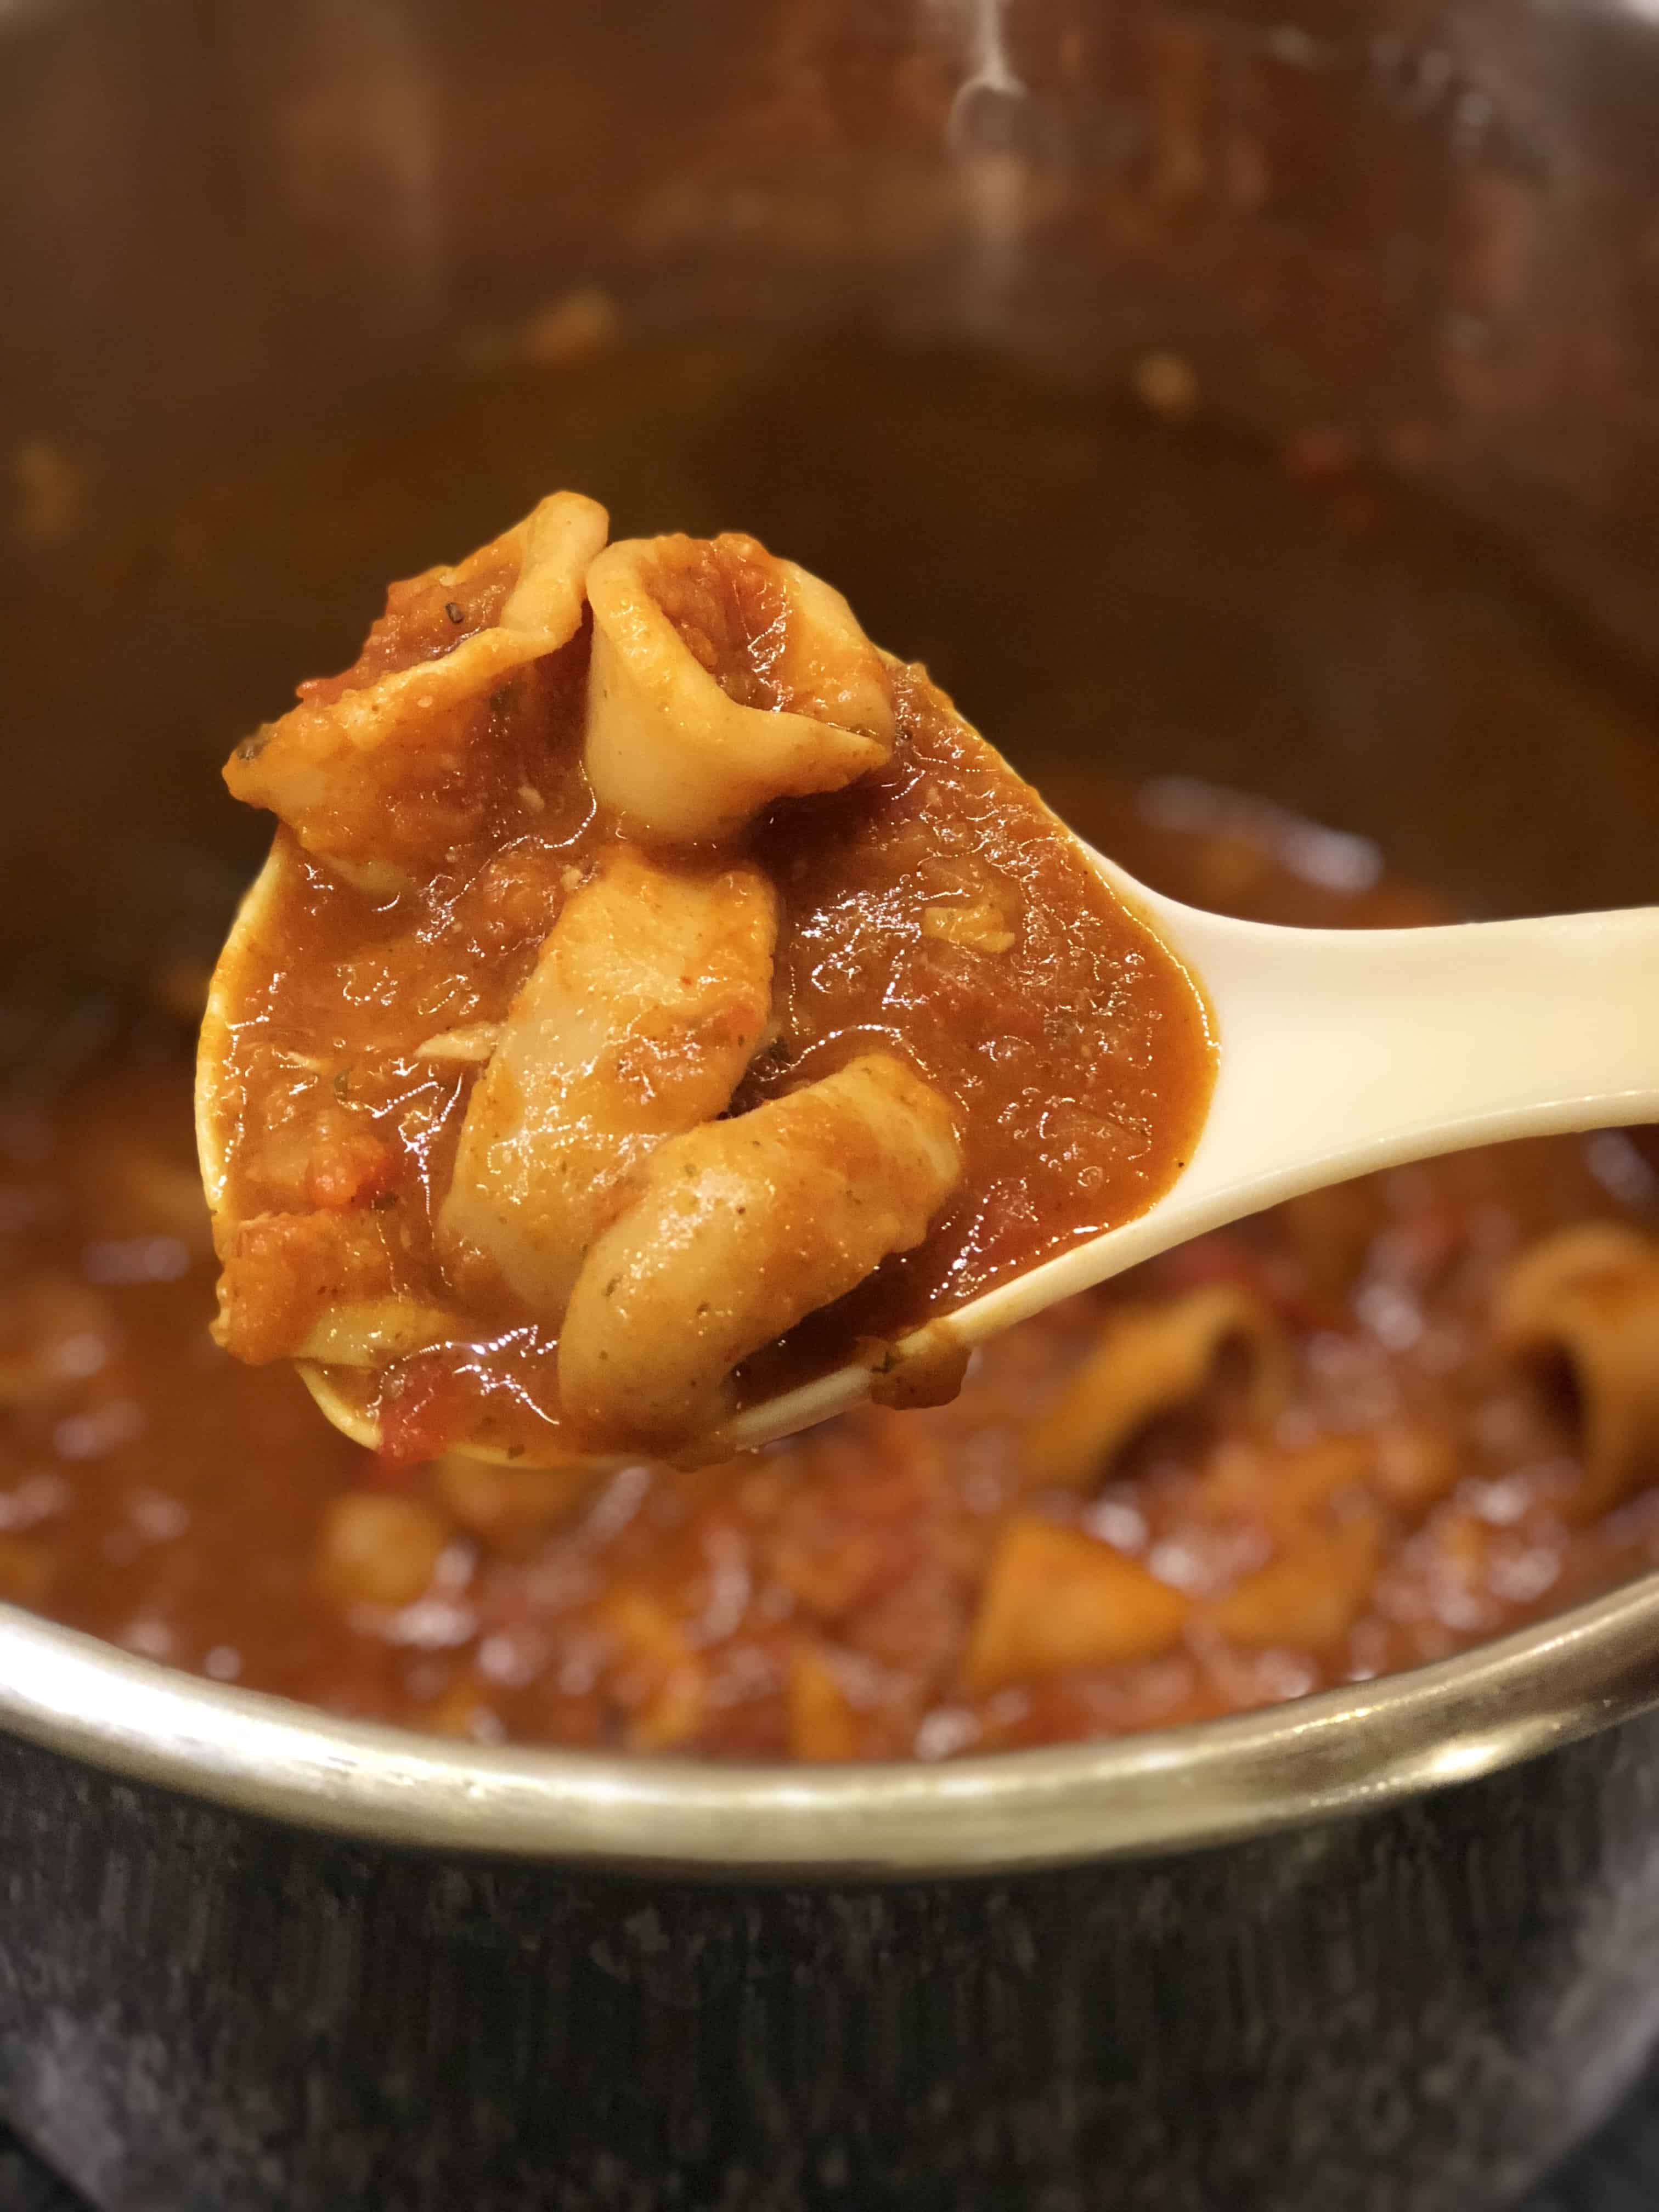 Instant Pot Squid Stew recipe by Feisty Tapas. Squid is really tender when pressure cooked and the sauce in this stew is delicious, with Spanish paprika hints. White ladle holding some of the stew with the Instant Pot's inner pot full of delicious Squid Stew in the background